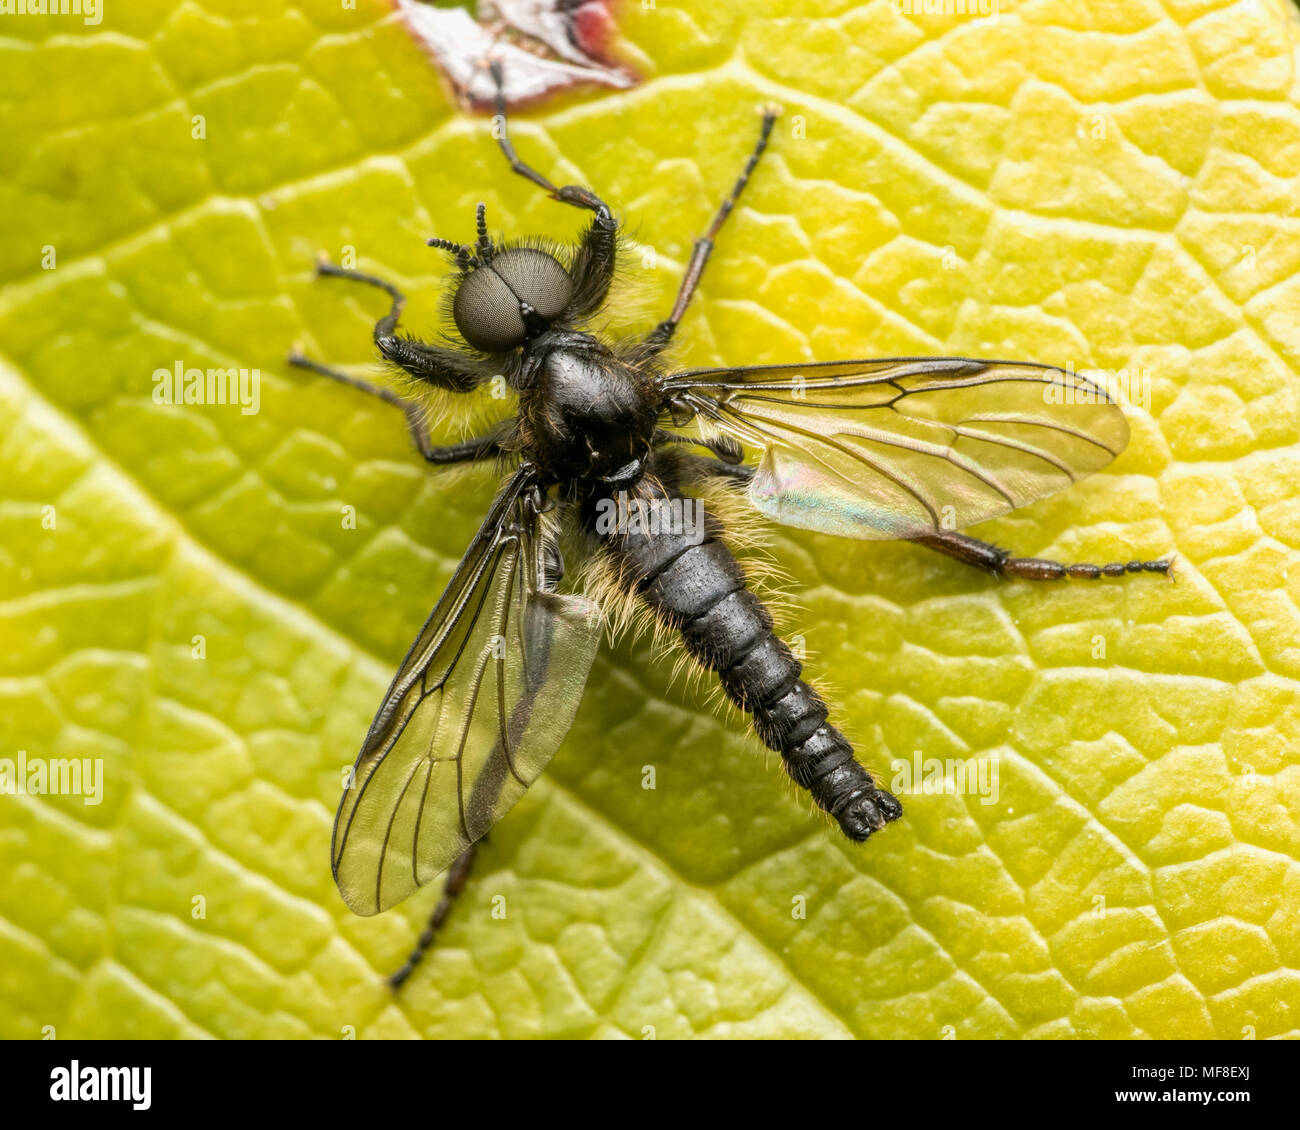 Dorsal view of Fly (Bibio sp.) on Rhododendron leafwith wings open. Tipperary, Ireland Stock Photo